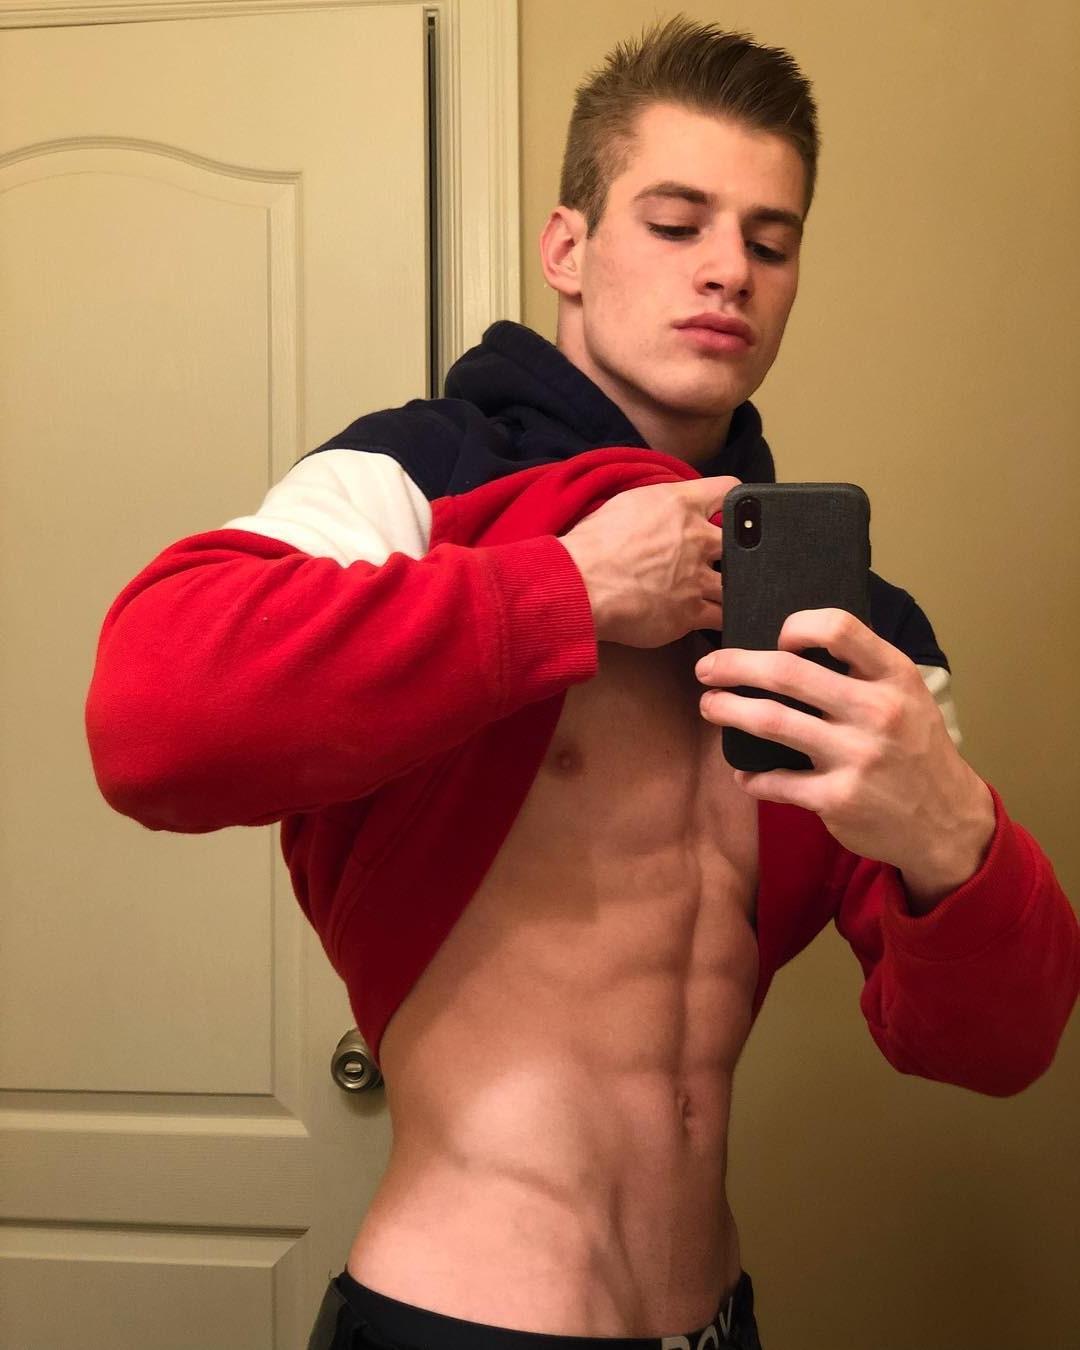 hot-beefy-muscle-bad-boy-pulling-shirt-abs-selfie